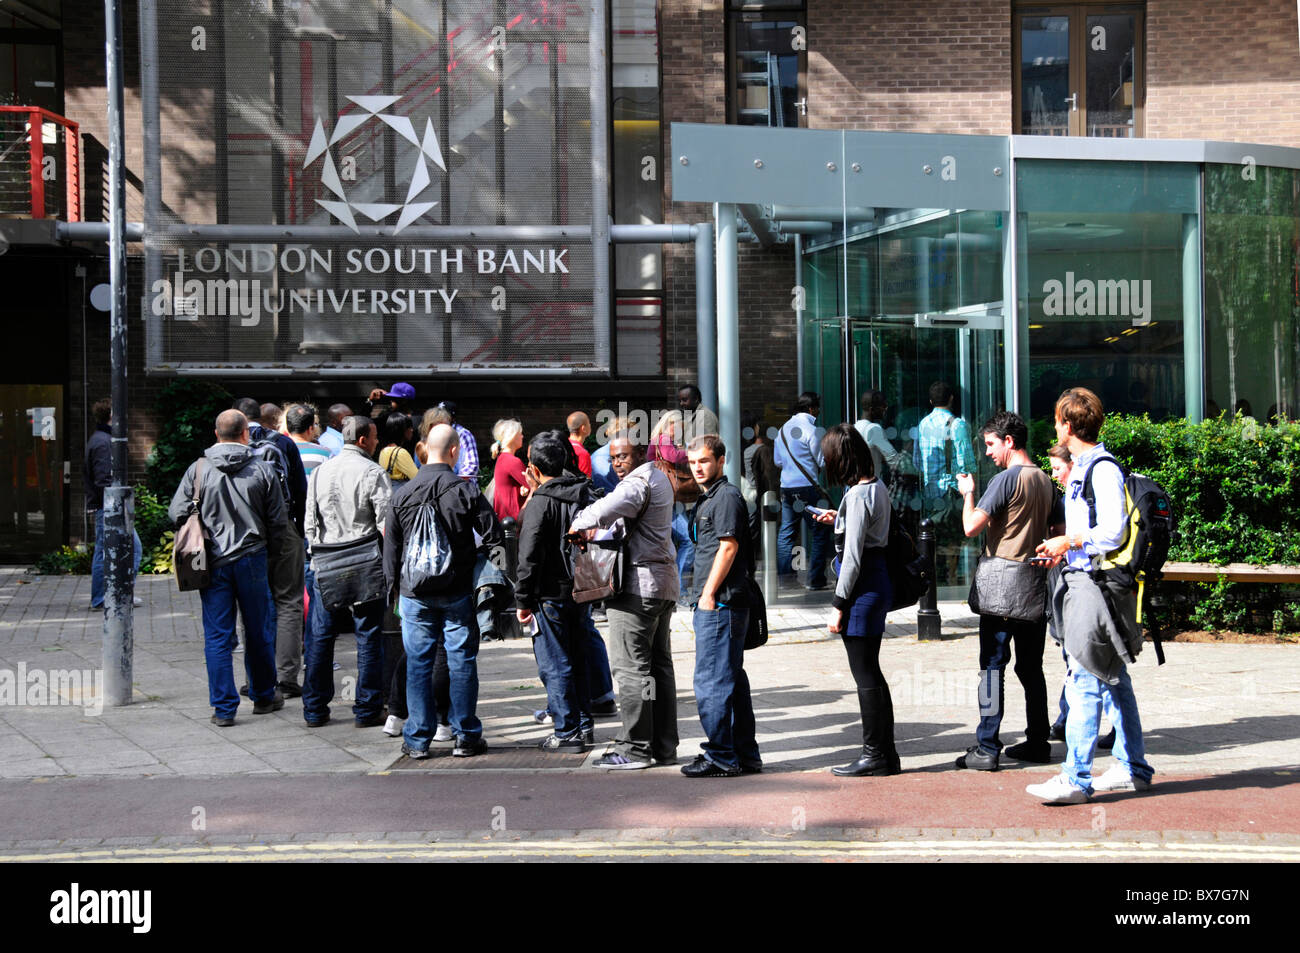 Group of students queuing on pavement outside entrance to London South Bank University in September Elephant & Castle Walworth South London England UK Stock Photo